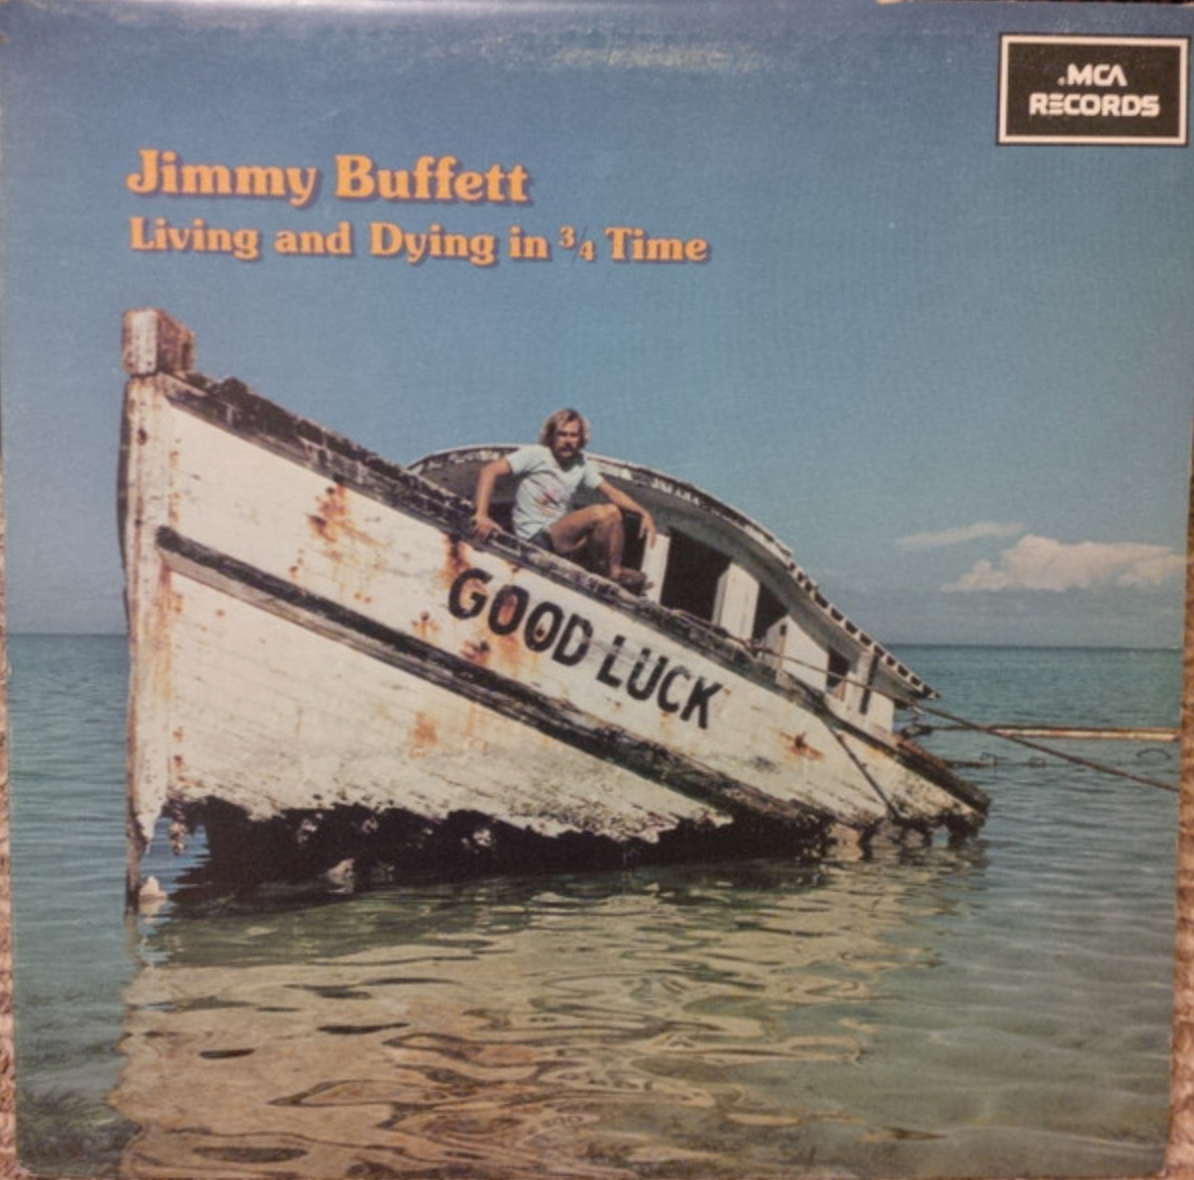 Jimmy Buffett – Living And Dying In 3/4 Time - 1974 US Pressing